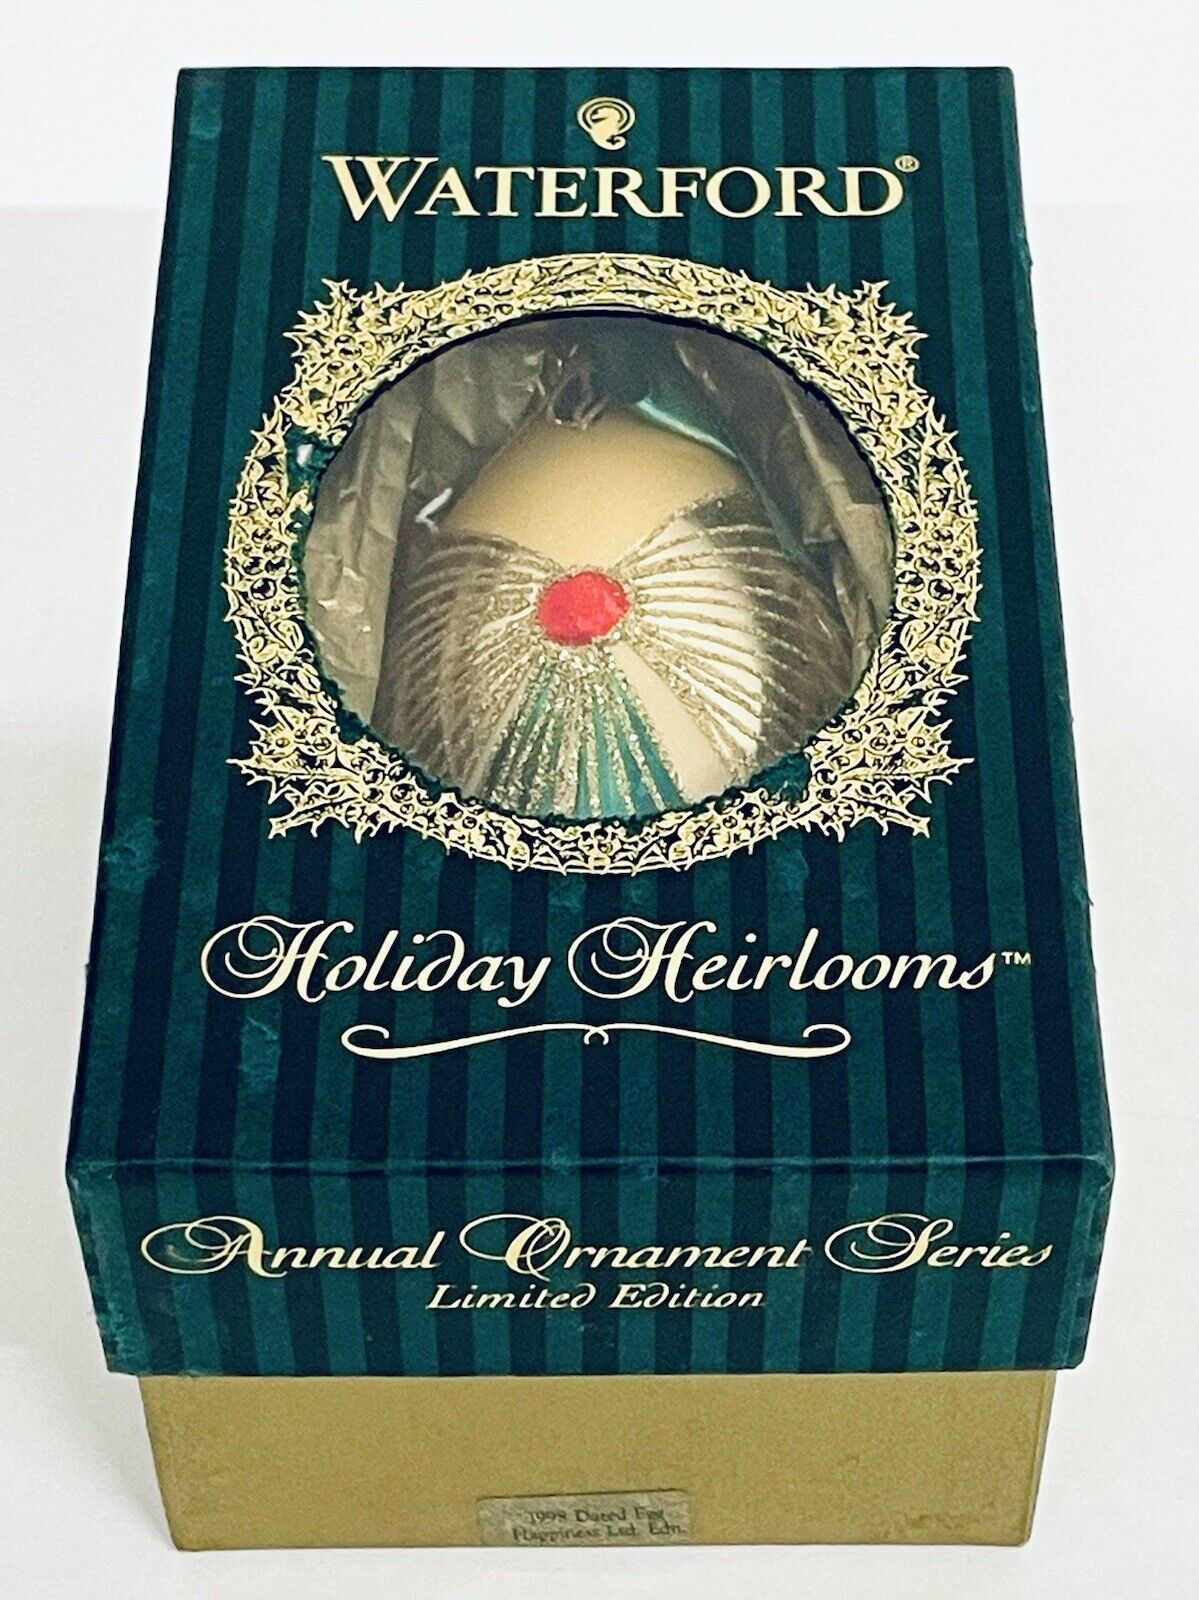 Stunning Vintage 1998 Waterford Holliday Heirlooms Limited Edition Ornaments